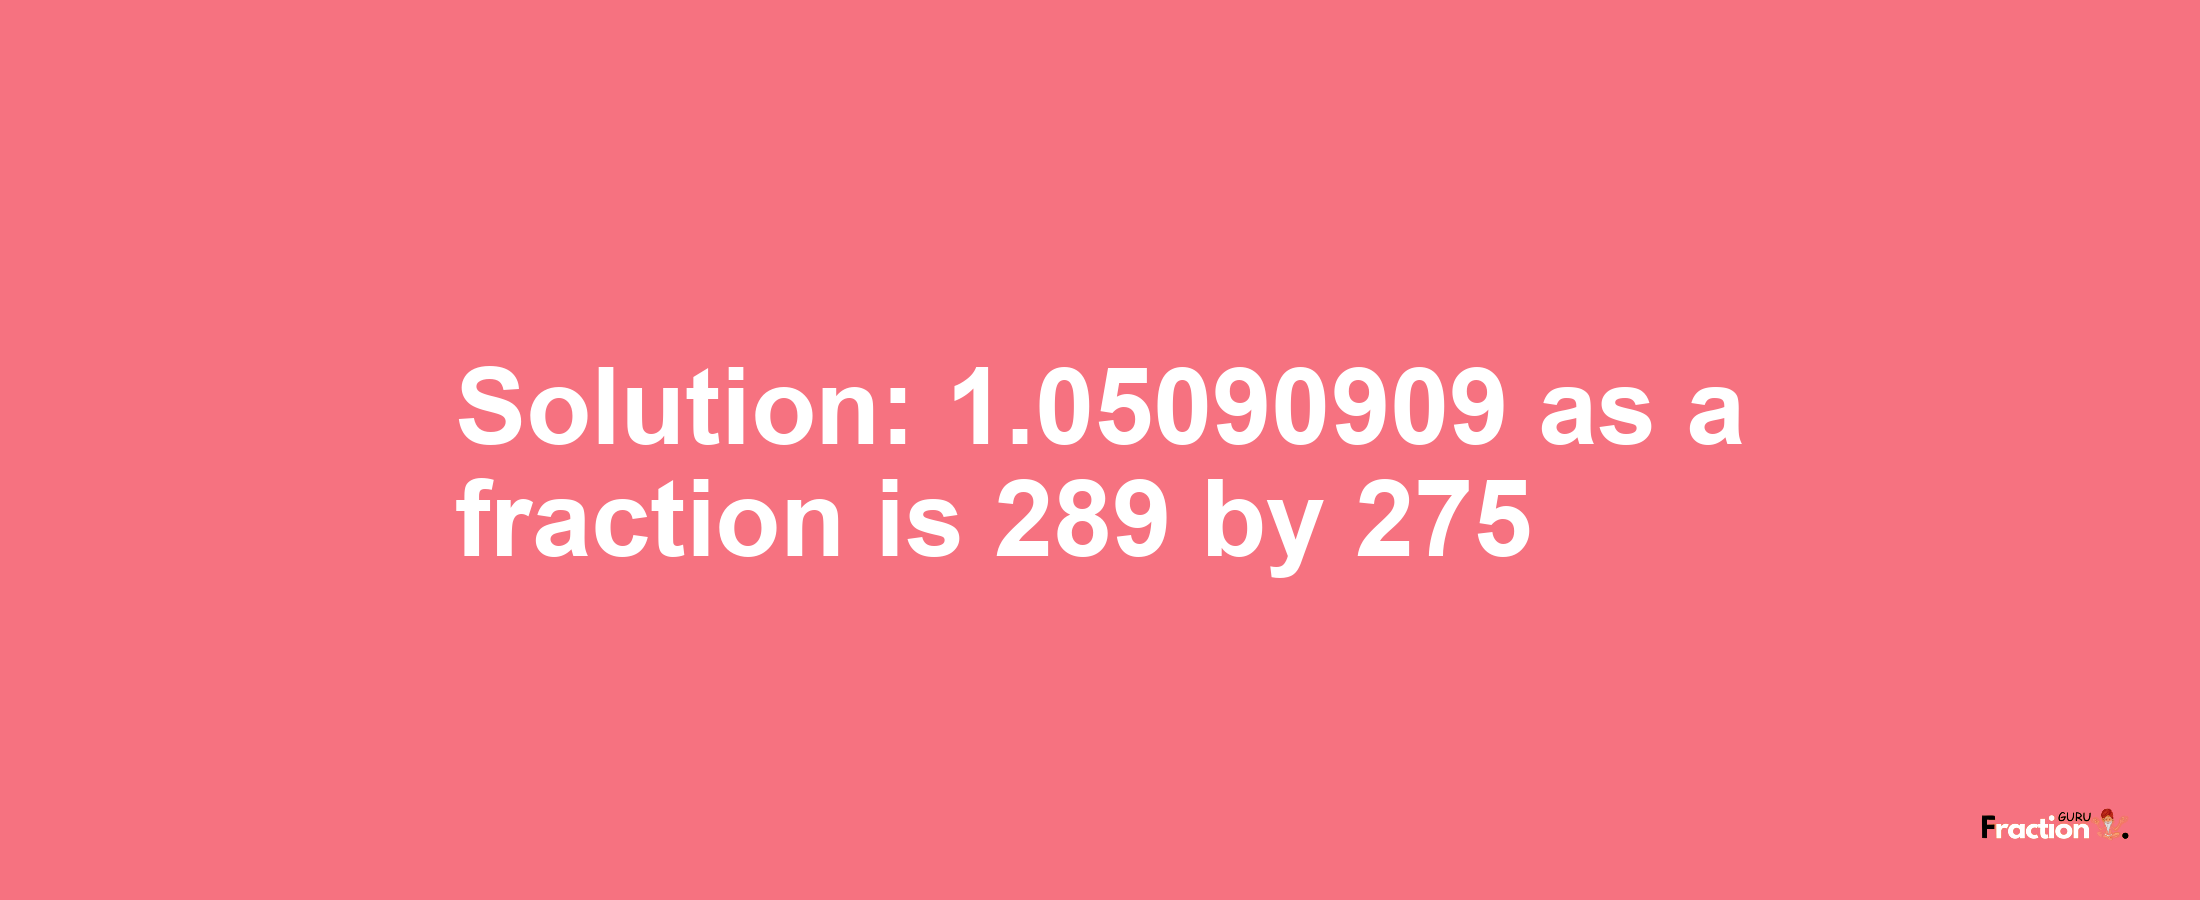 Solution:1.05090909 as a fraction is 289/275